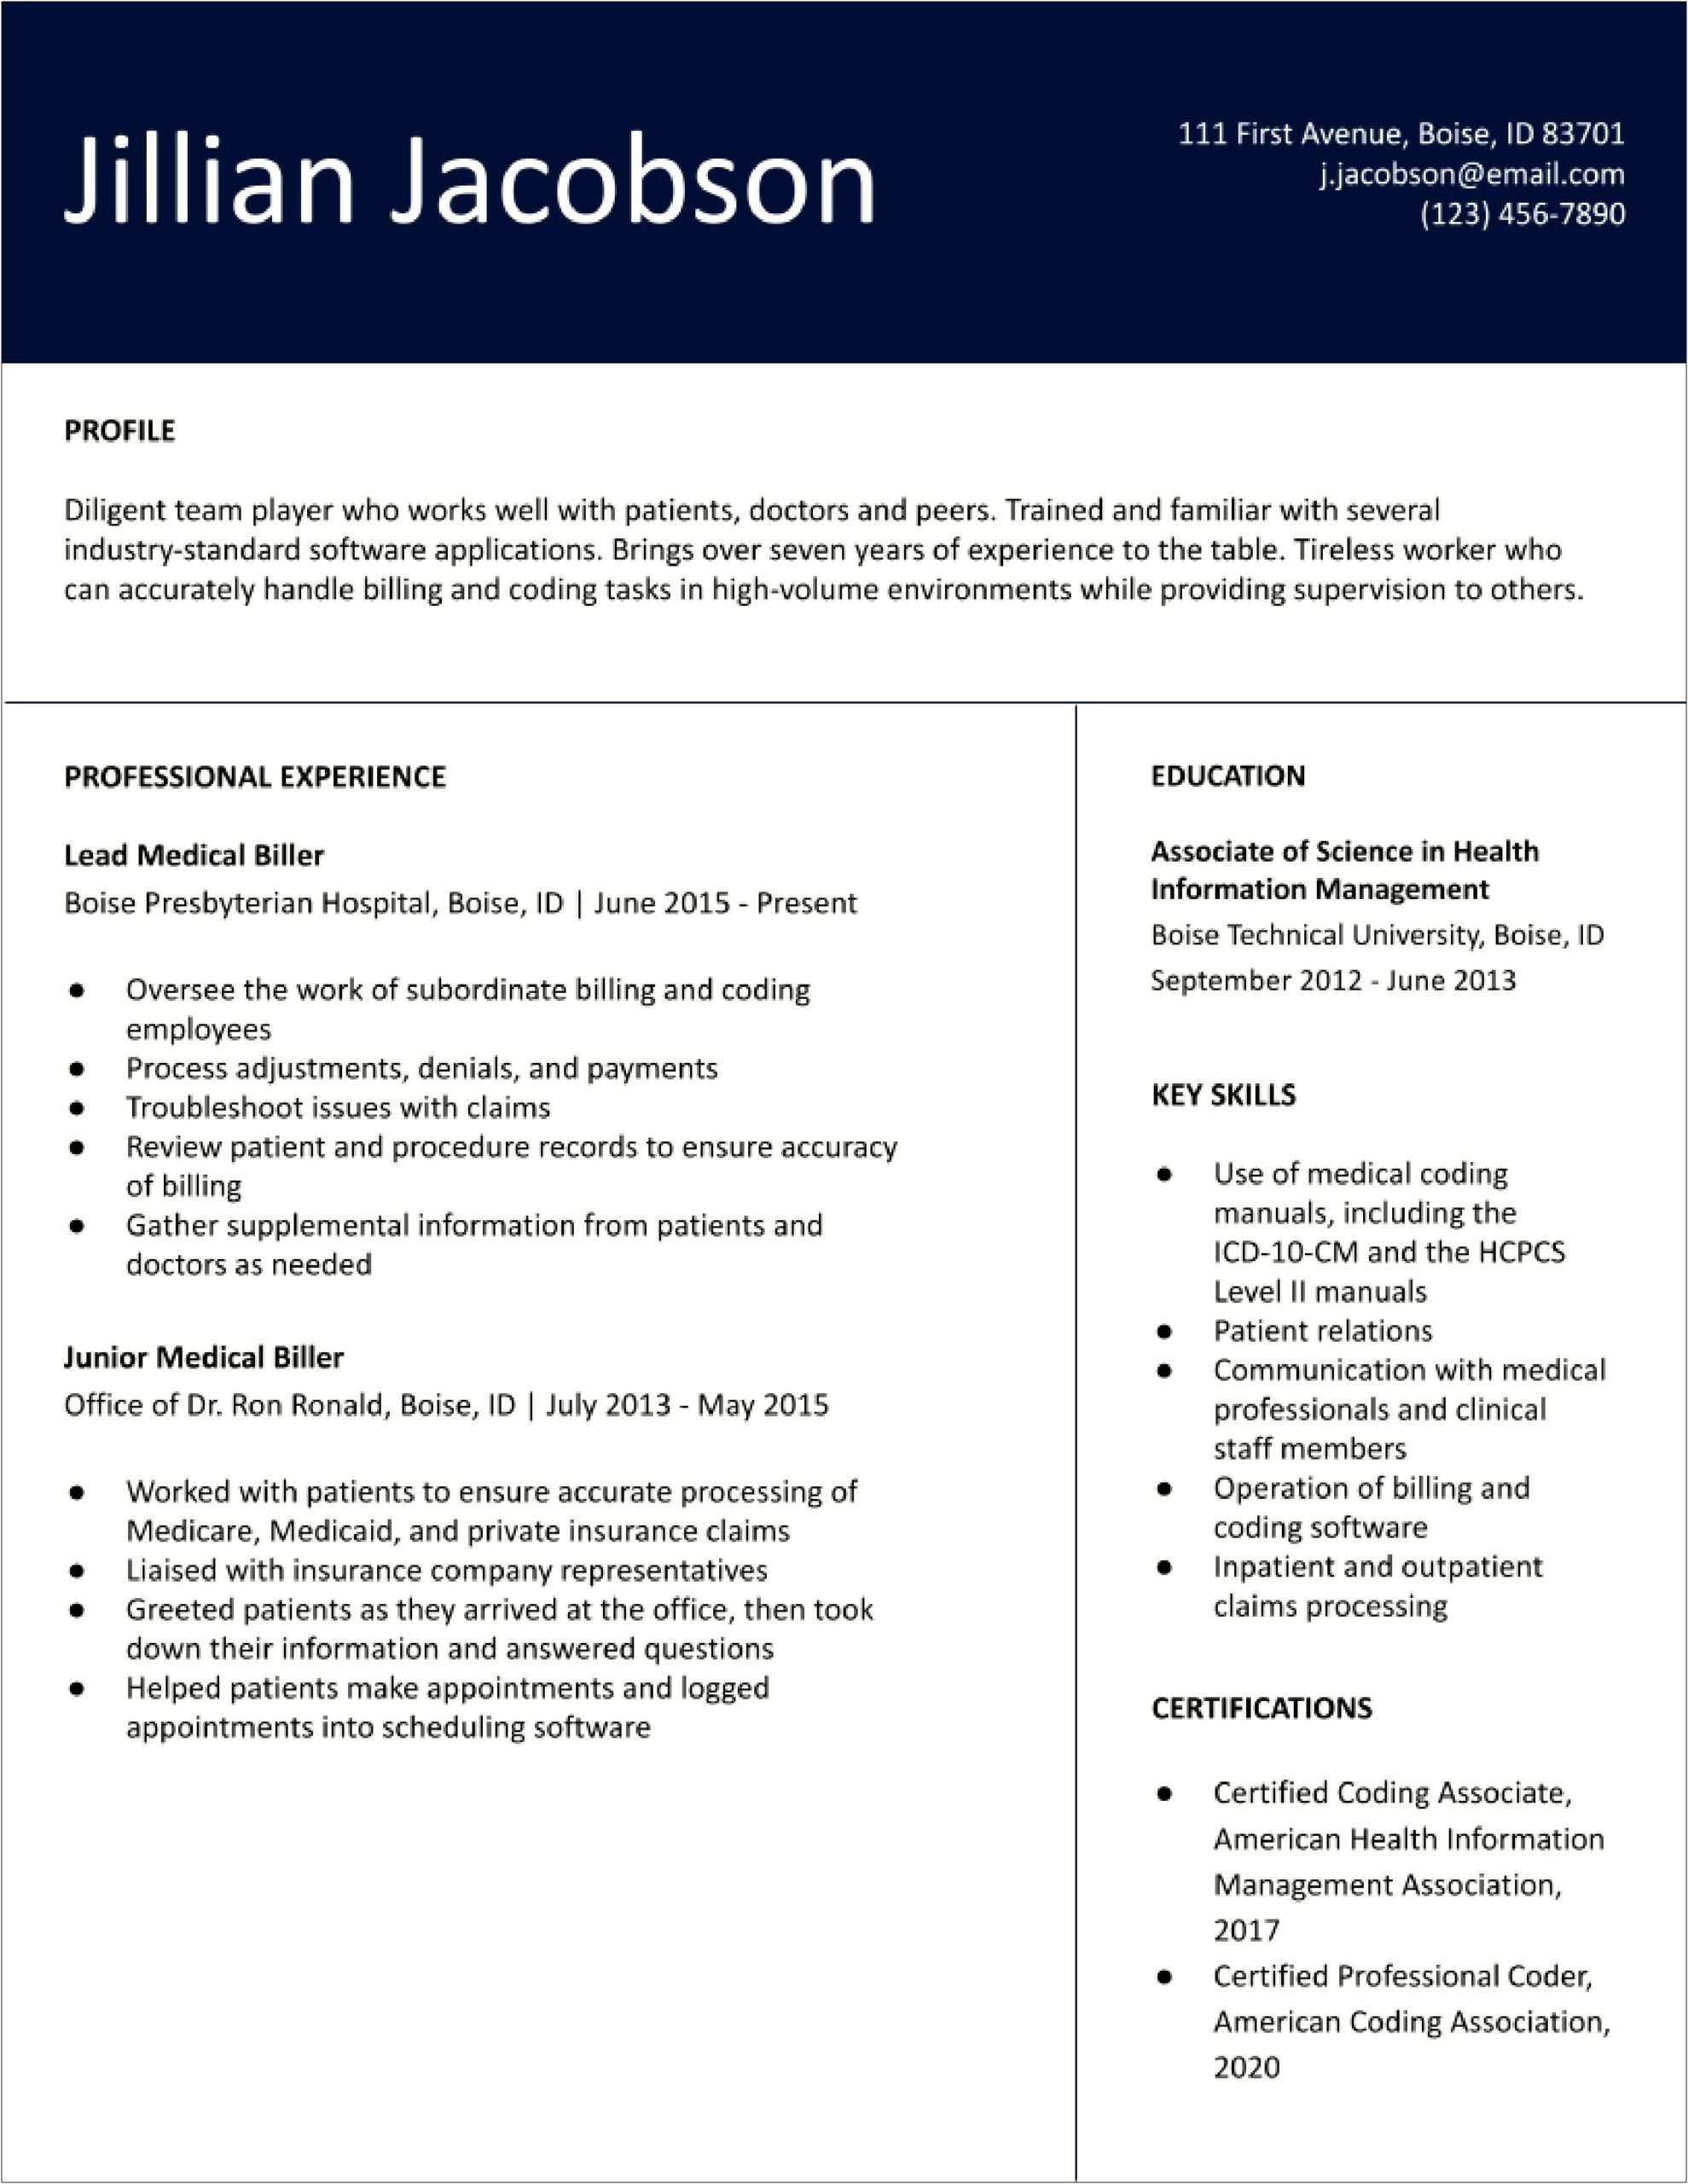 Medical Coder Resume Objective 5 Years Experience